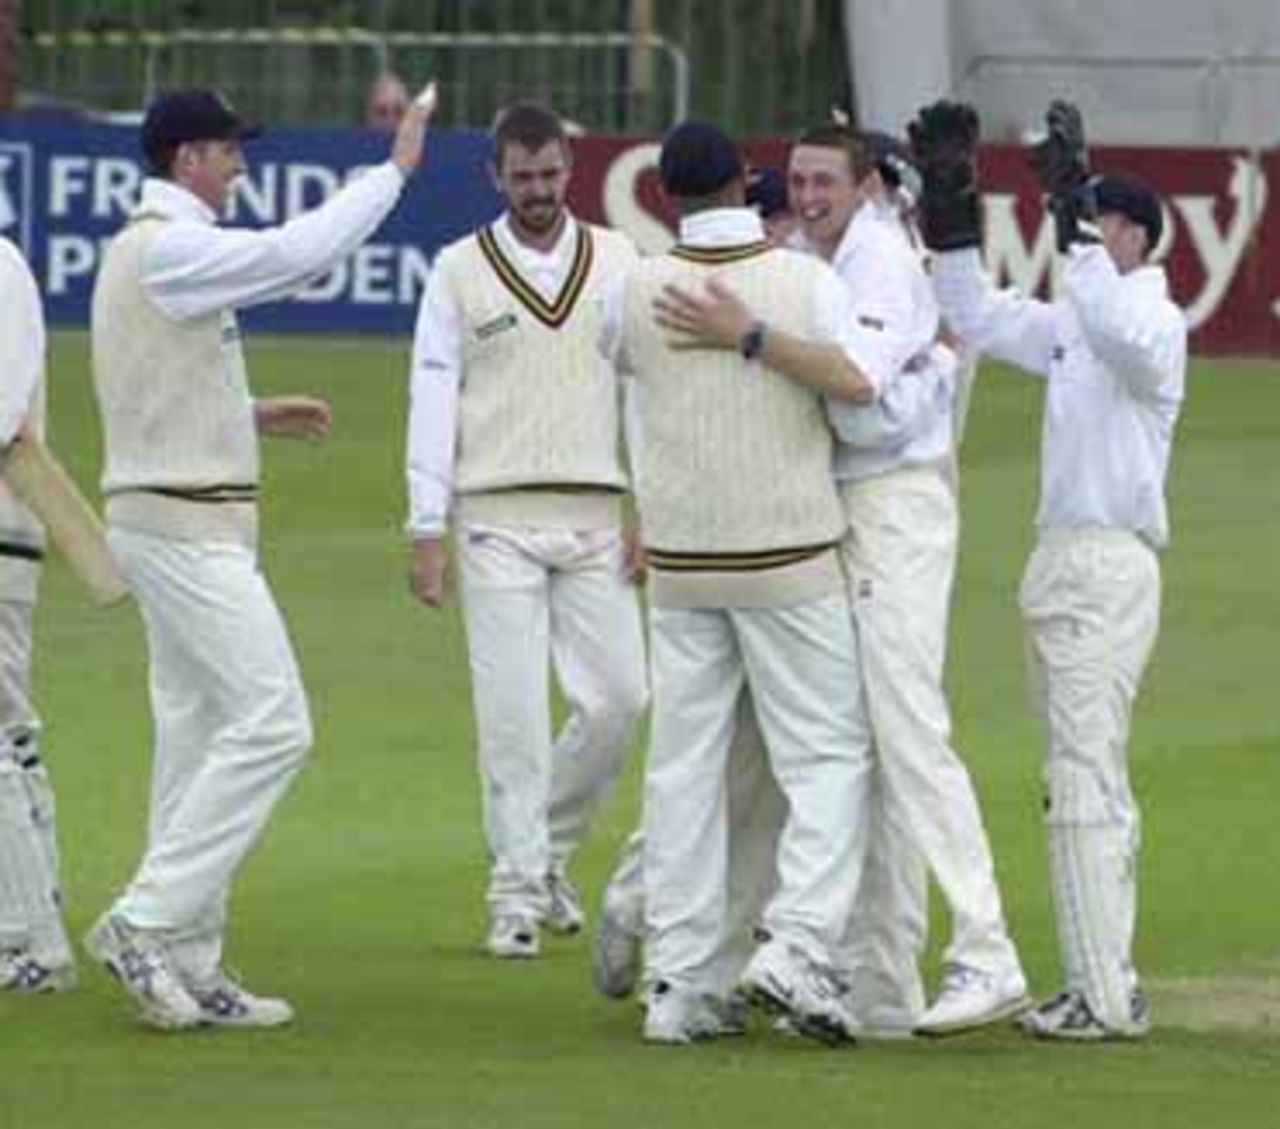 Durham's Steve Harmison gets the congratulations on the wicket of Rob Bailey